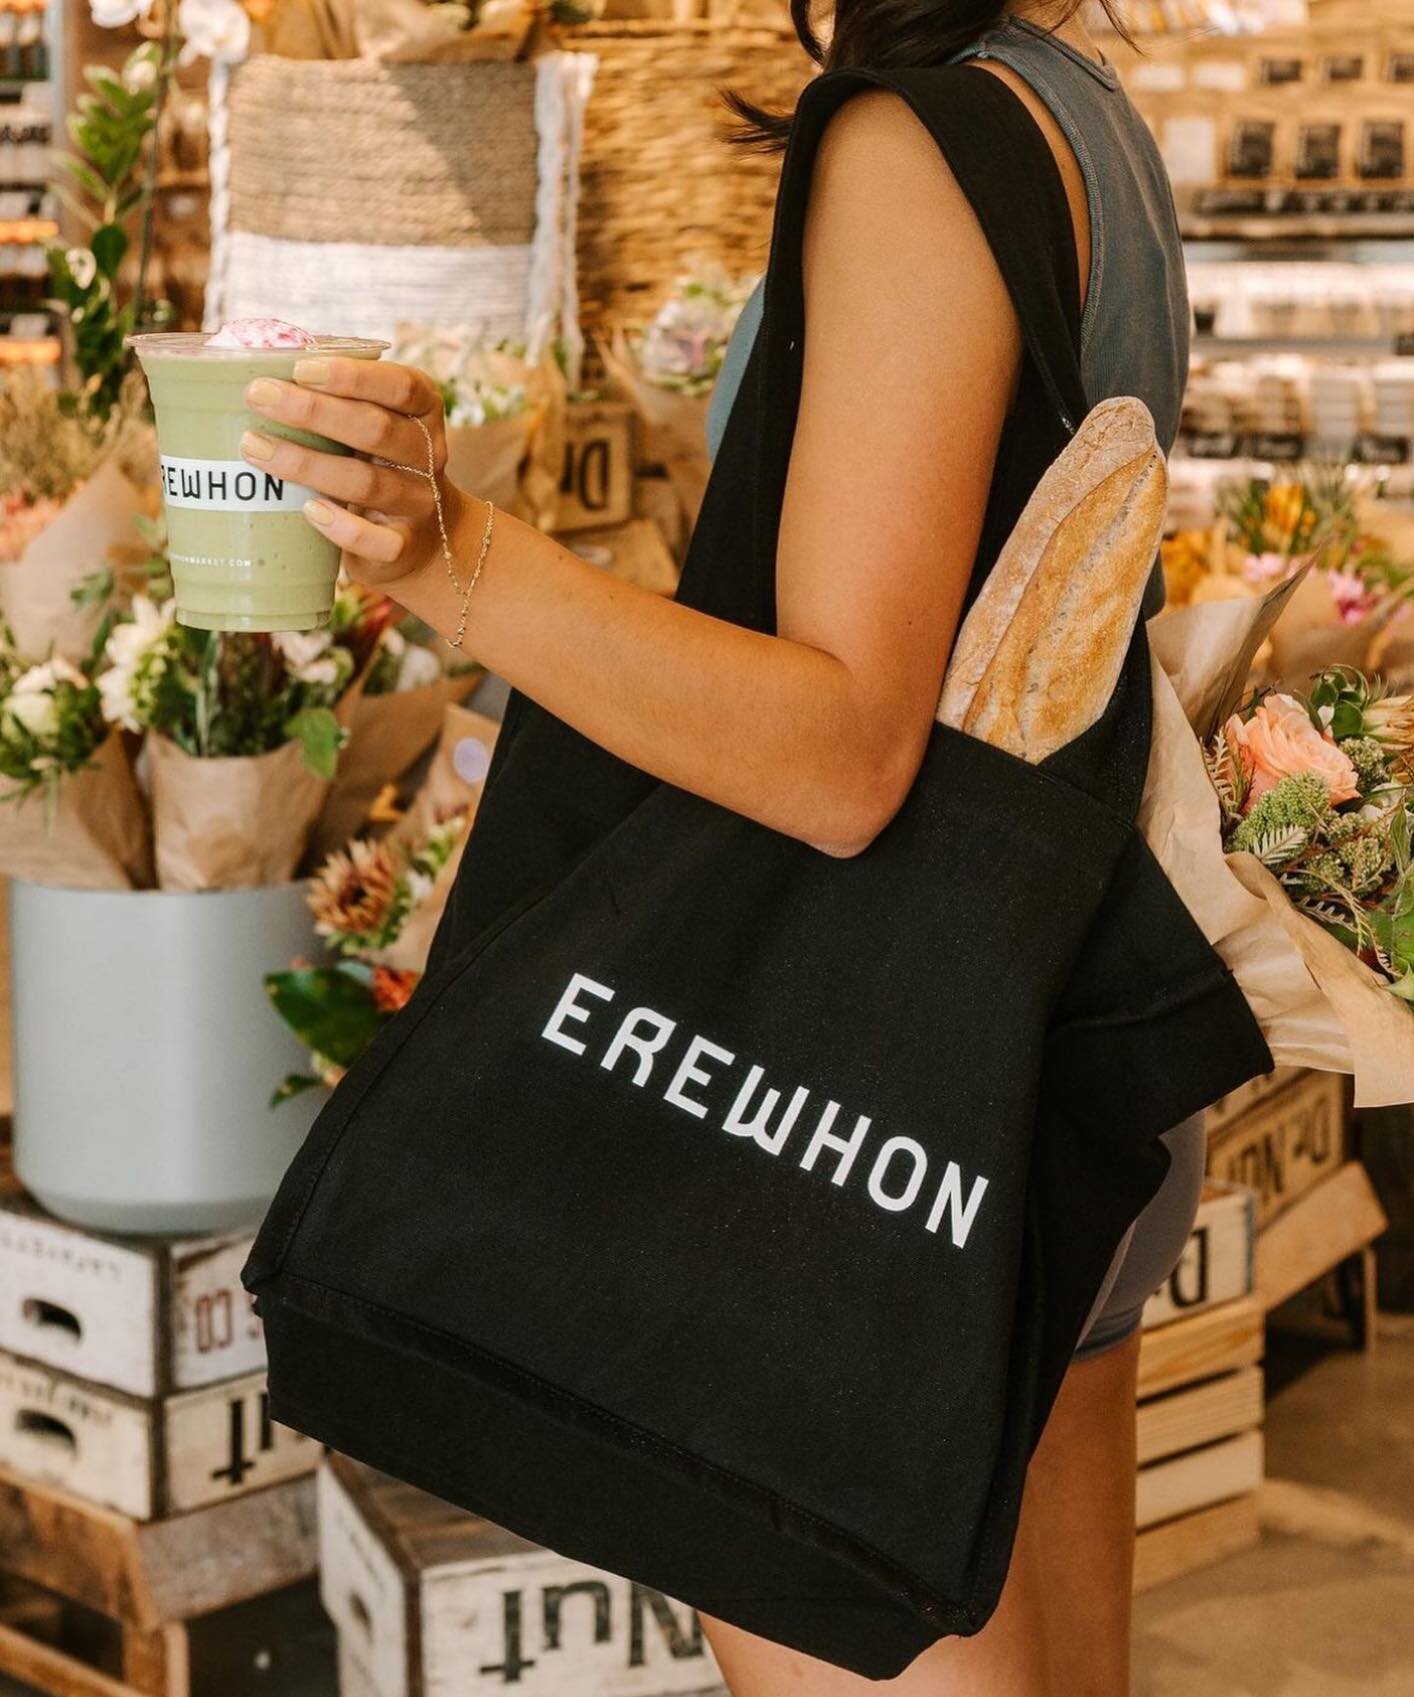 Counting down the days UNTIL JUNE 6th at @erewhonmarket when we have a @paulsaladinomd RAW KEFIR smoothie collab x RAW FARM x CarnivoreMD x EREWHON (any guesses what the smoothie recipe will be?????) 

 #animalbased #smoothie #carnivore #erewhonsmoot